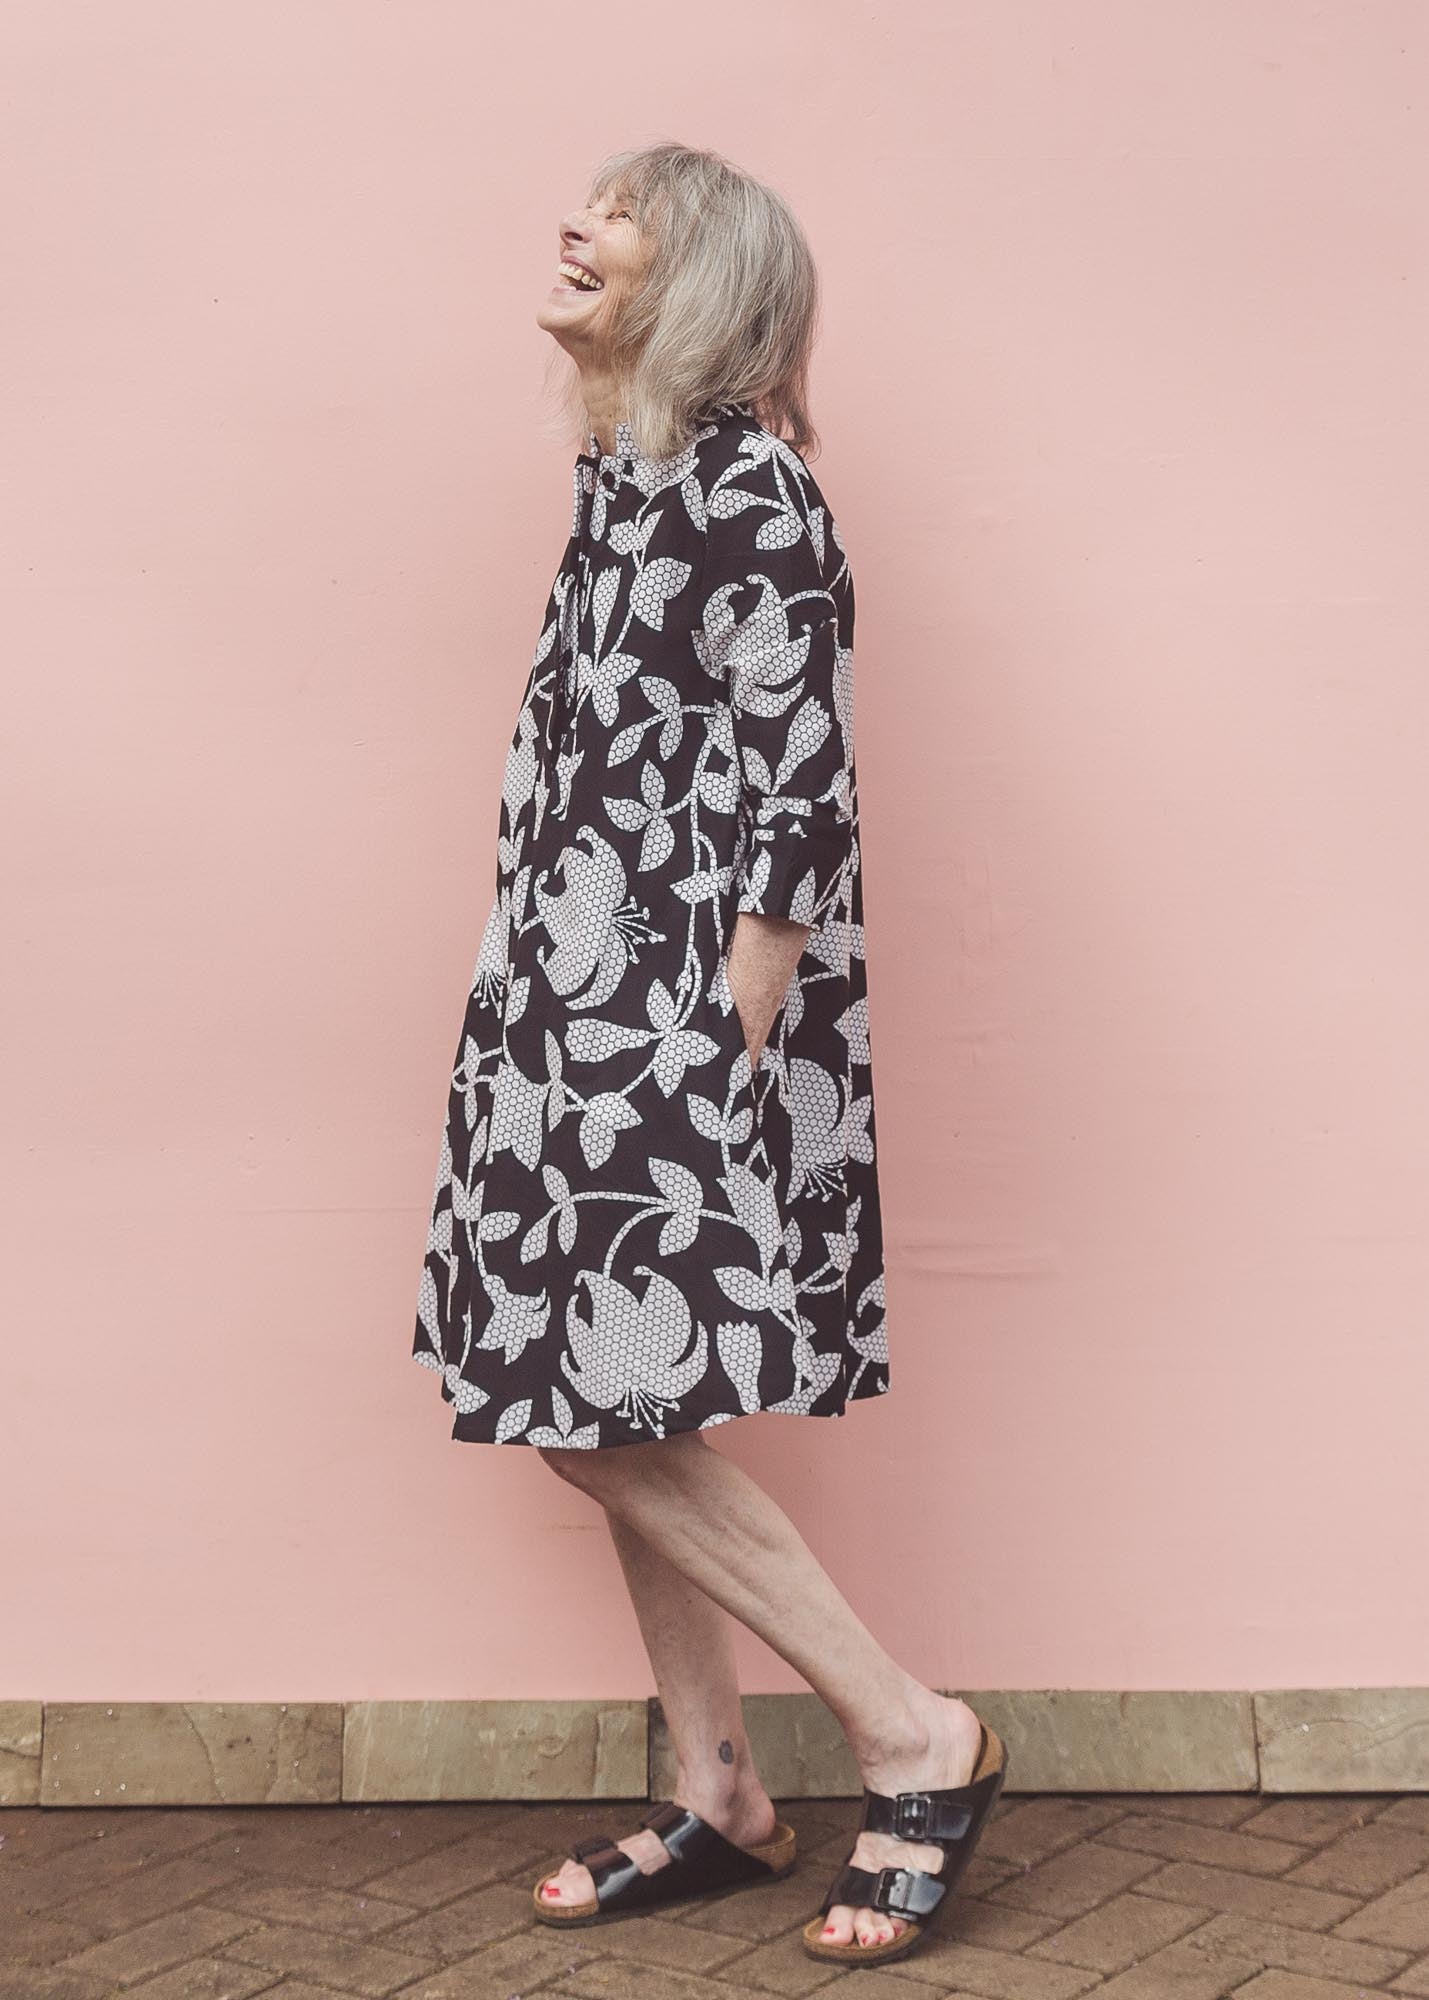 The model is wearing black dress with white and gray leaf print